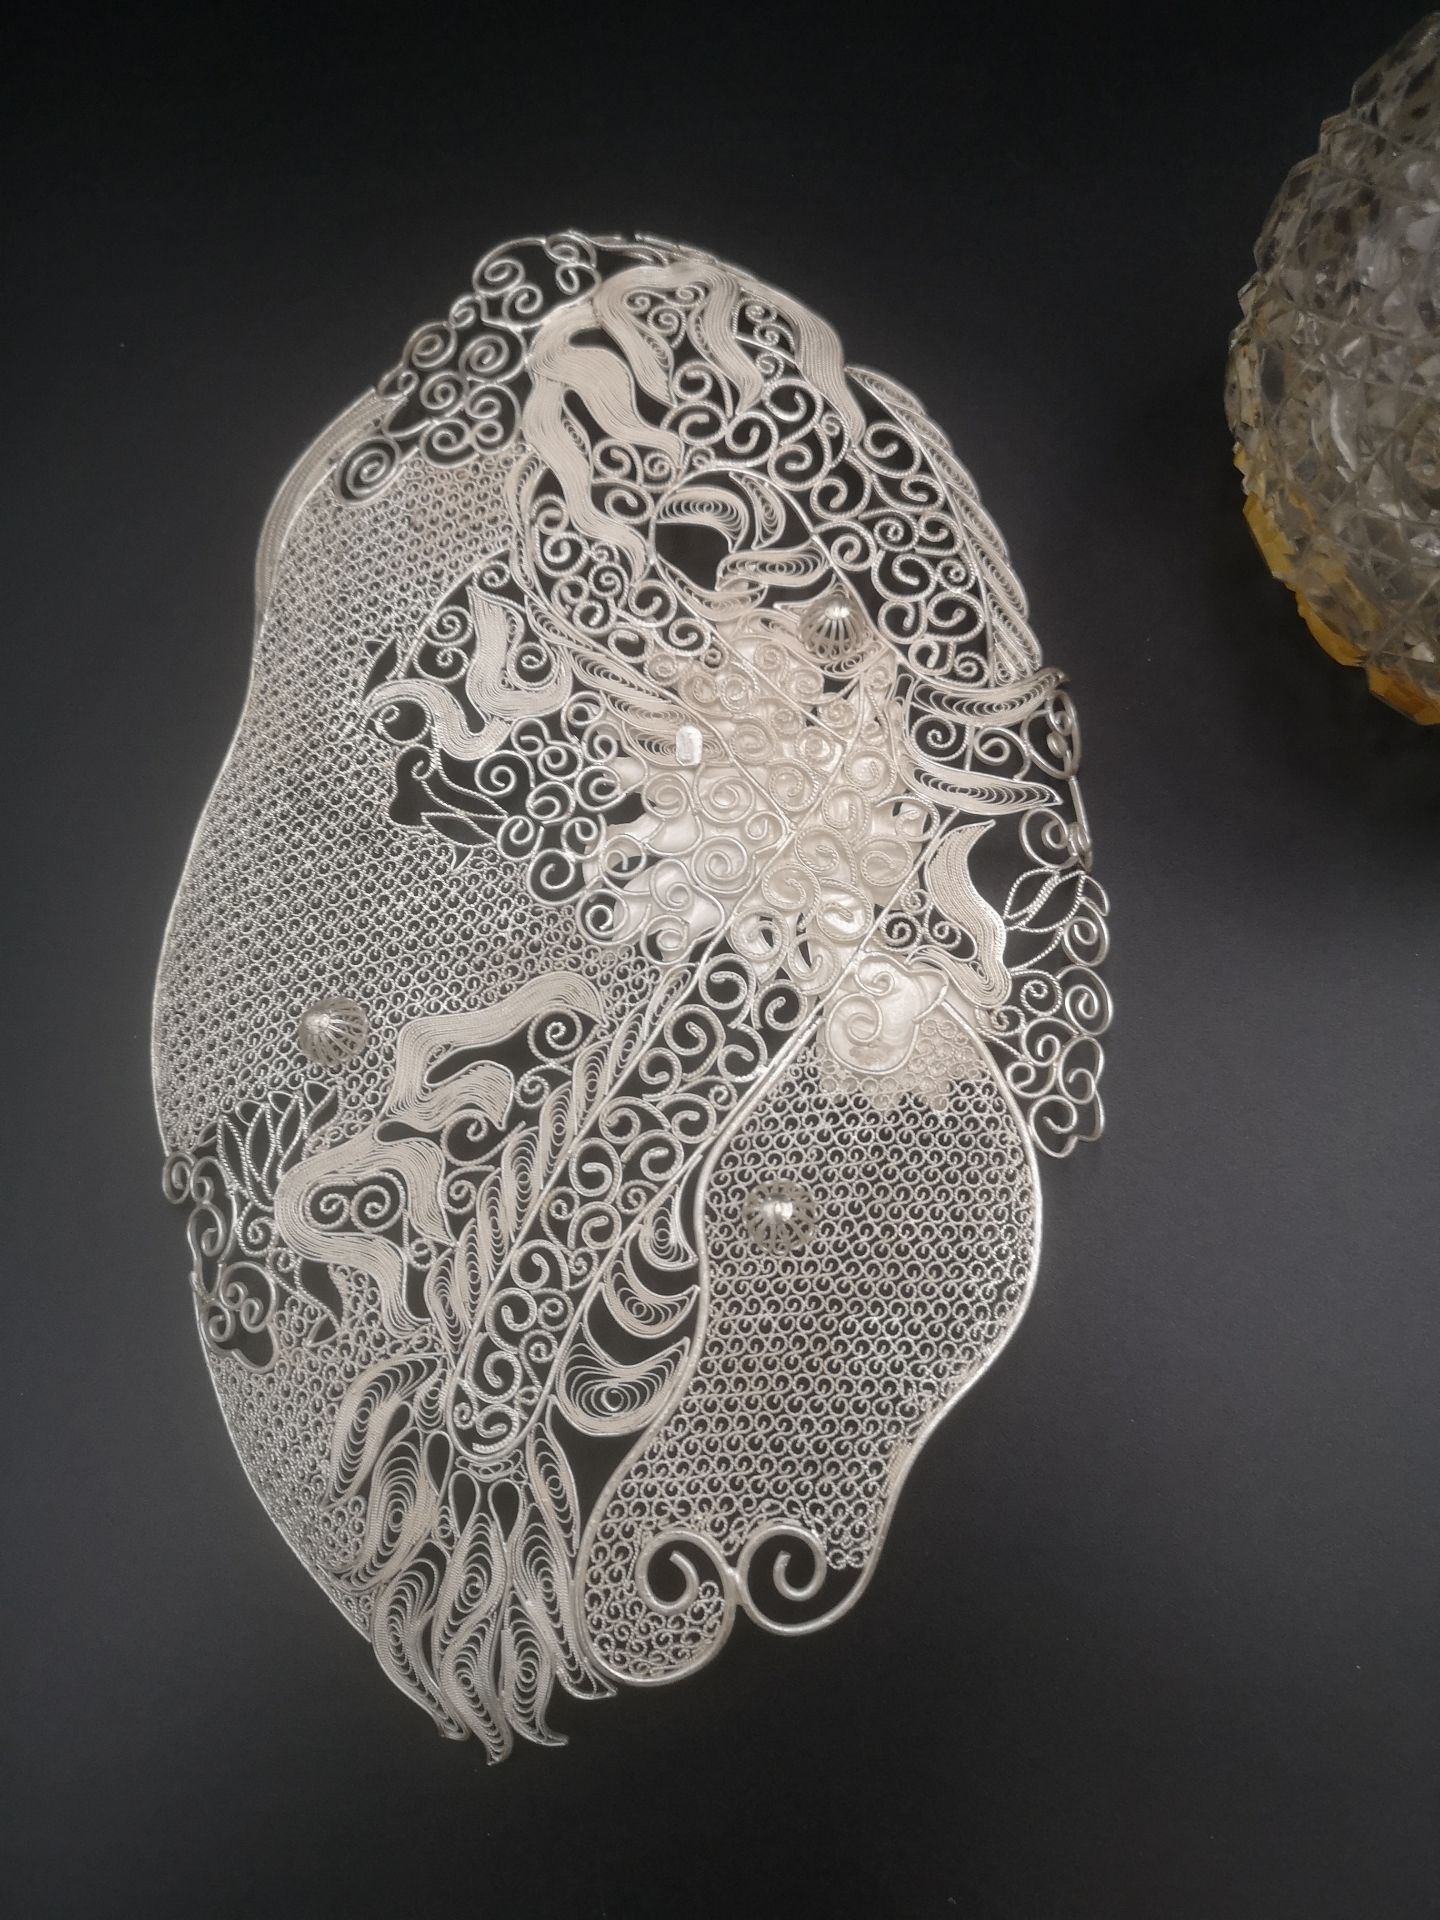 Cut glass perfume bottle together with a white metal filigree tray - Image 3 of 5